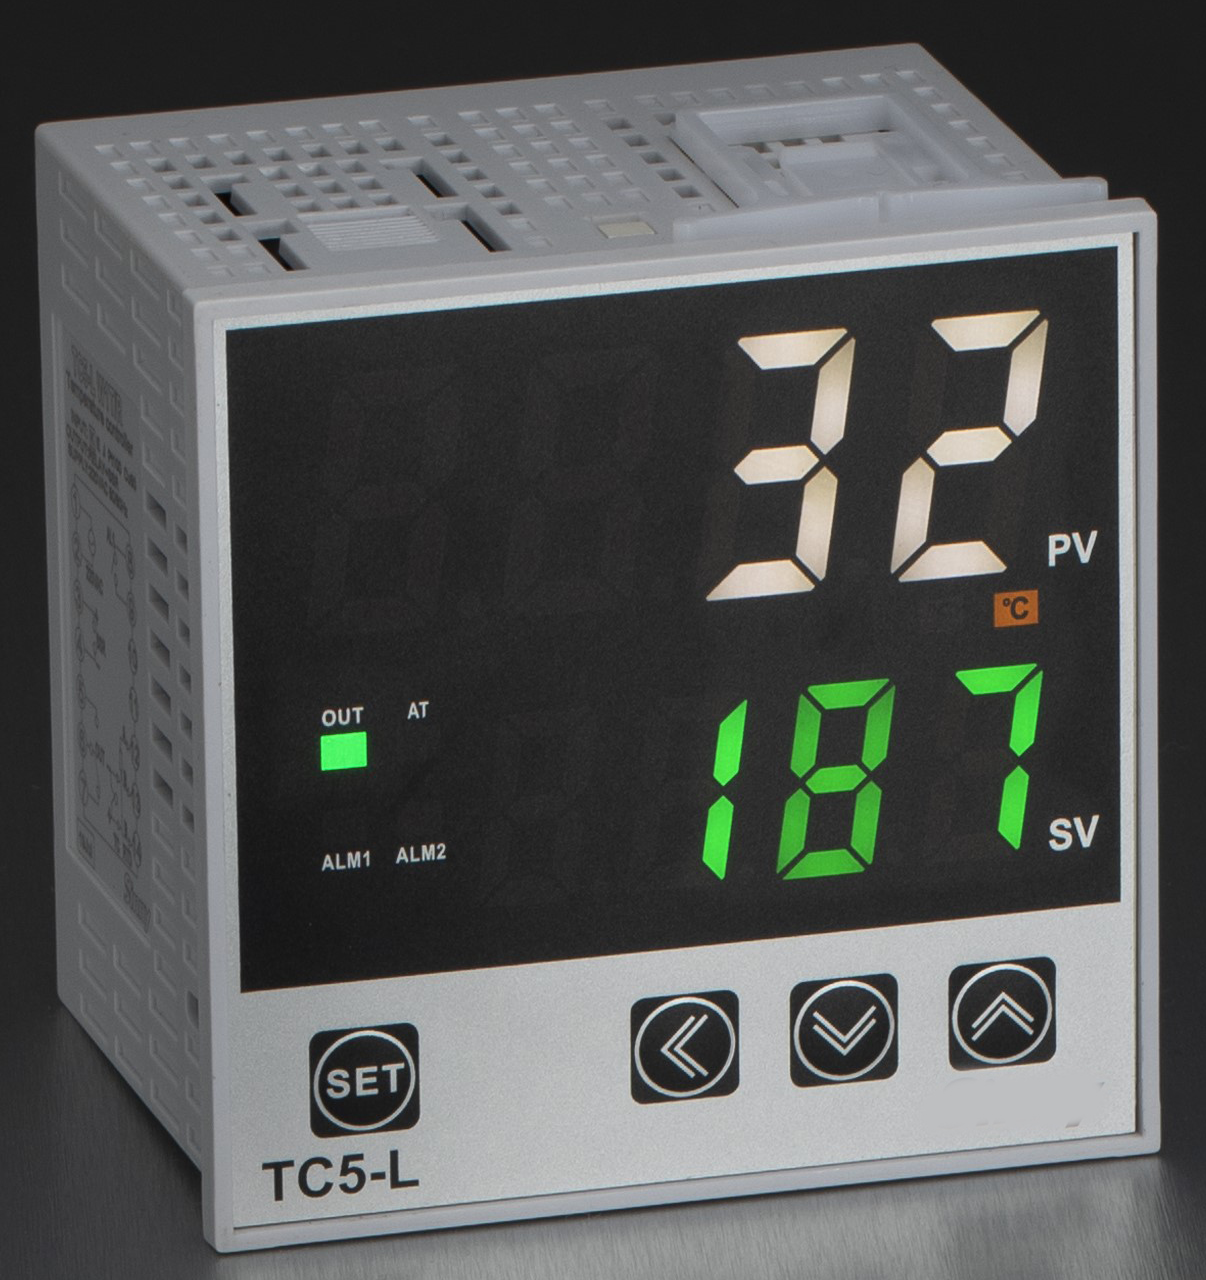 FC5-L-1A-2-G-2 PID Controller, 100-240VAC with 2 Relay Alarms, E,J,N,T,S,R,B Thermocouple, Linear Current/Voltage and  PT100/Cu20 RTD Input, 96x96mm,4-20mA Output